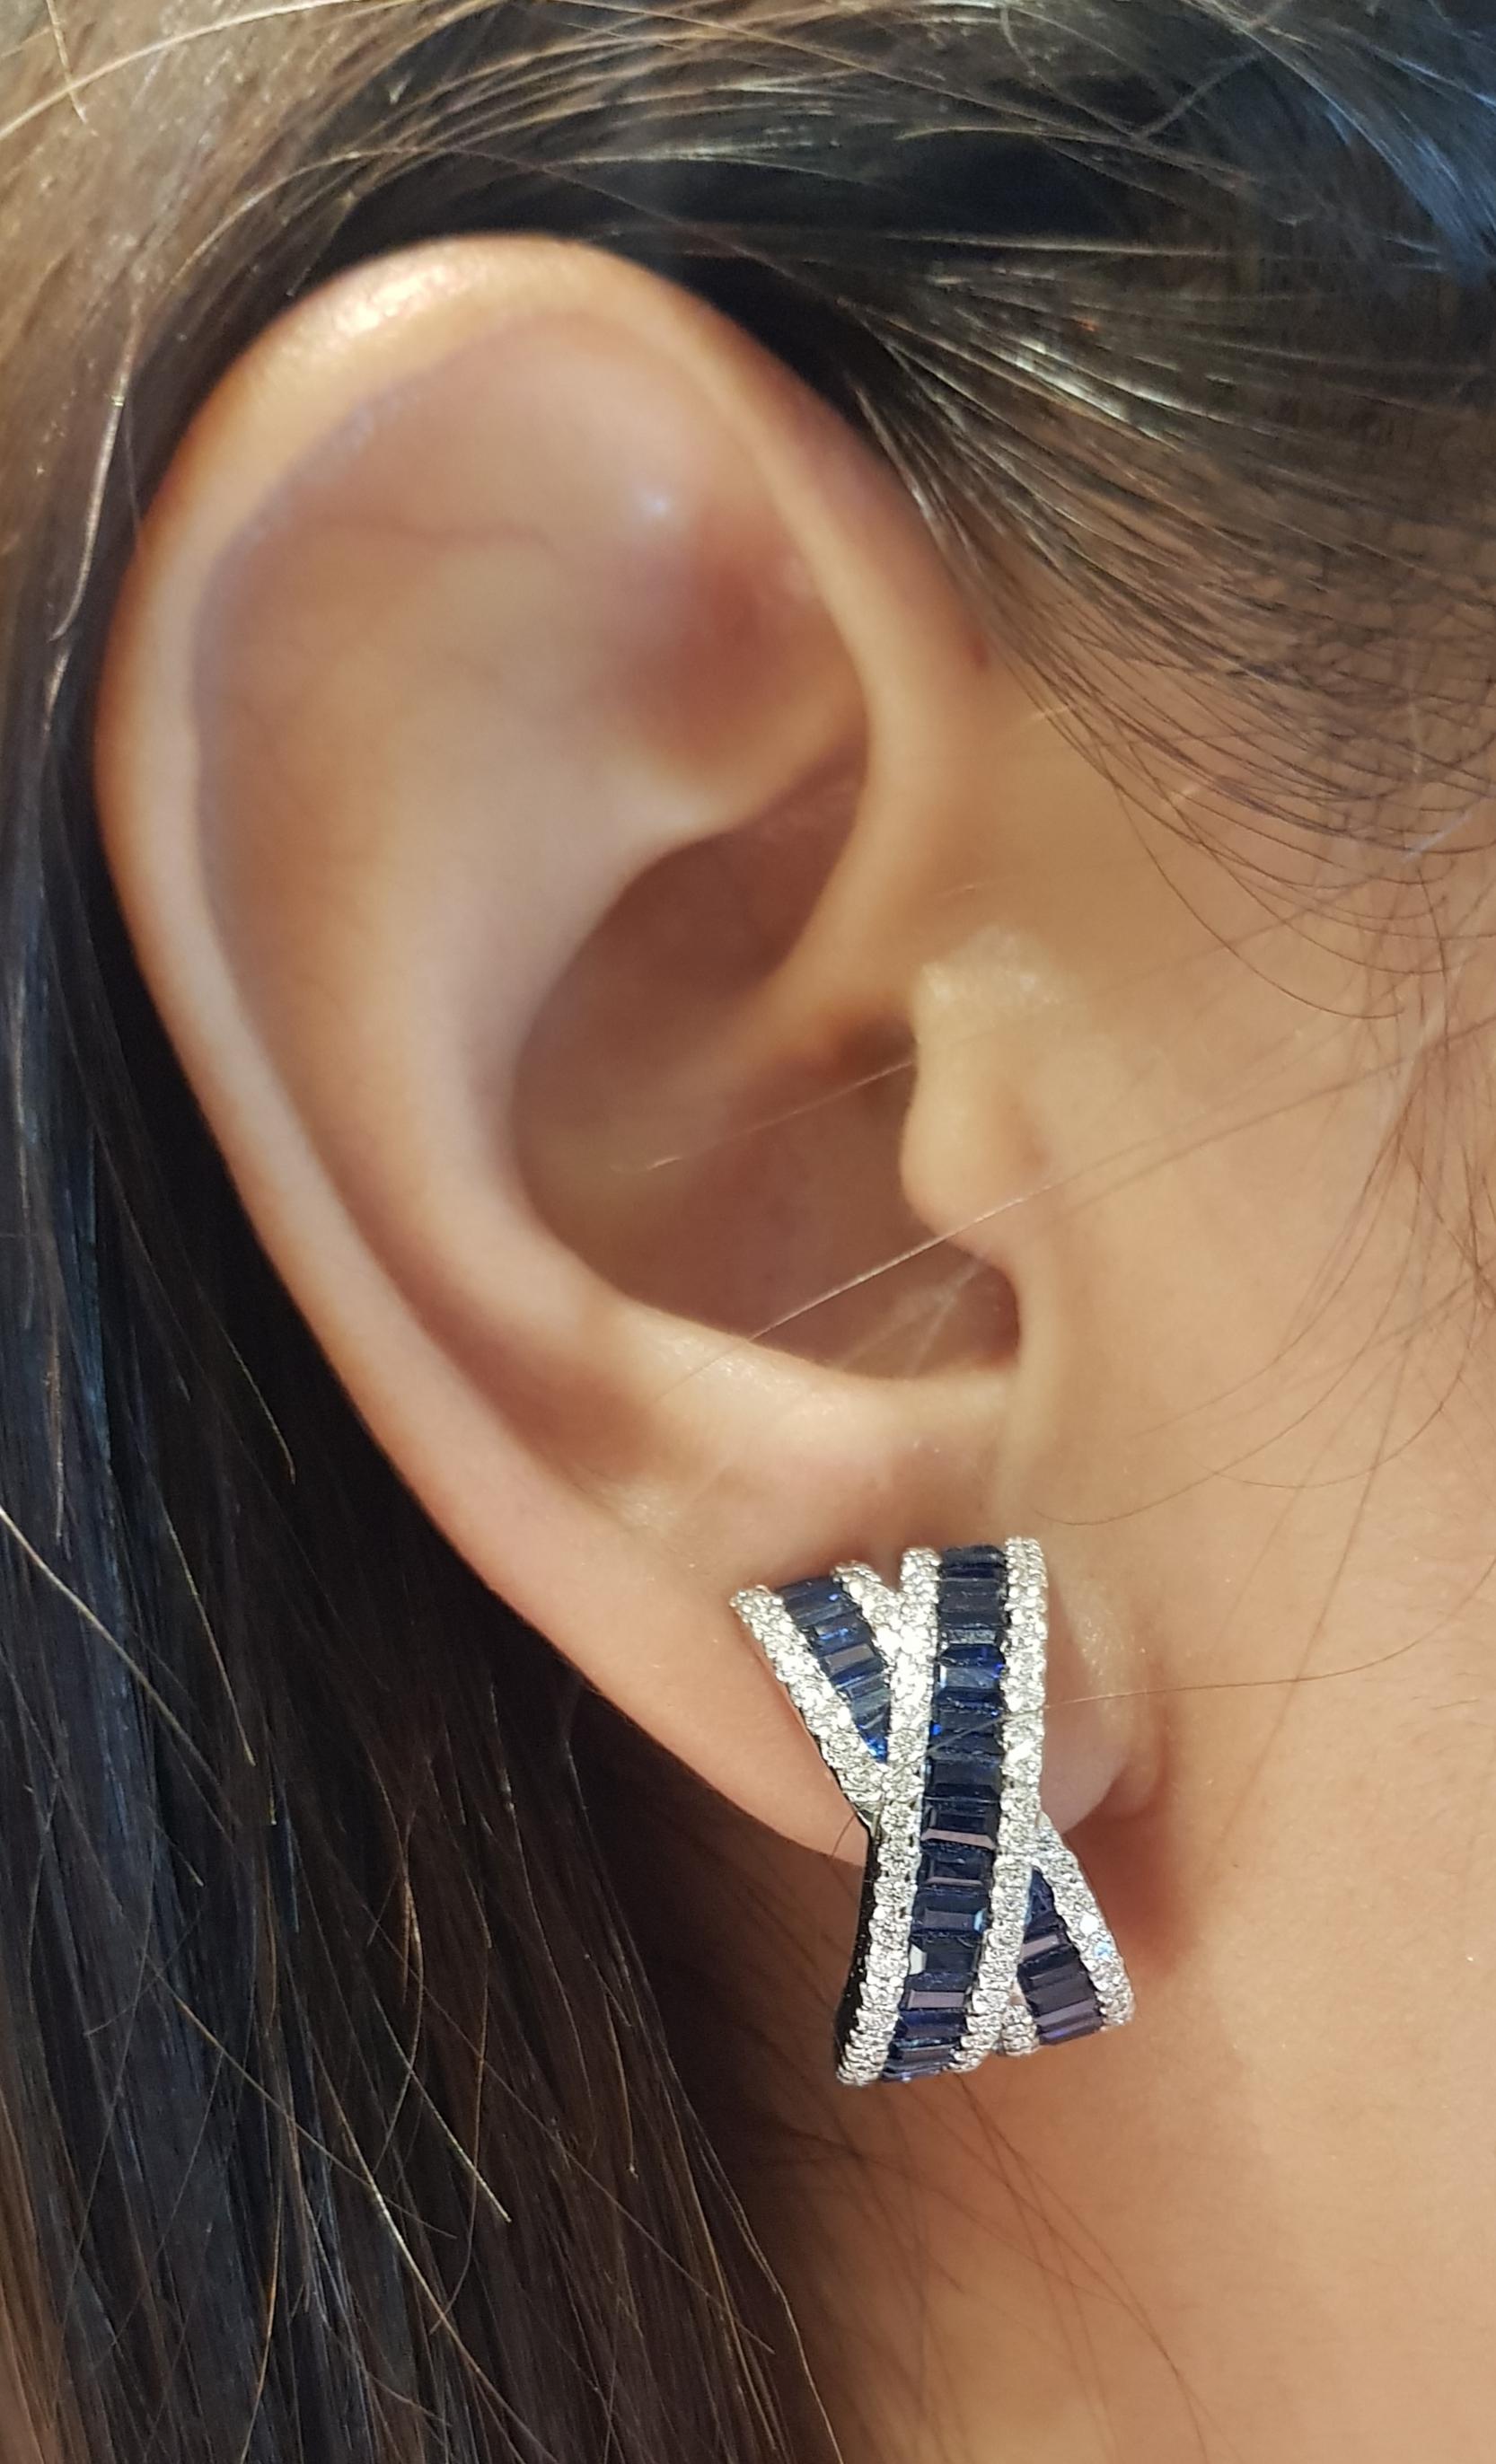 Blue Sapphire 6.29 carats with Diamond 1.11 carats Earrings set in 18 Karat White Gold Settings

Width:  1.2 cm 
Length: 2.0 cm
Total Weight: 15.54 grams

